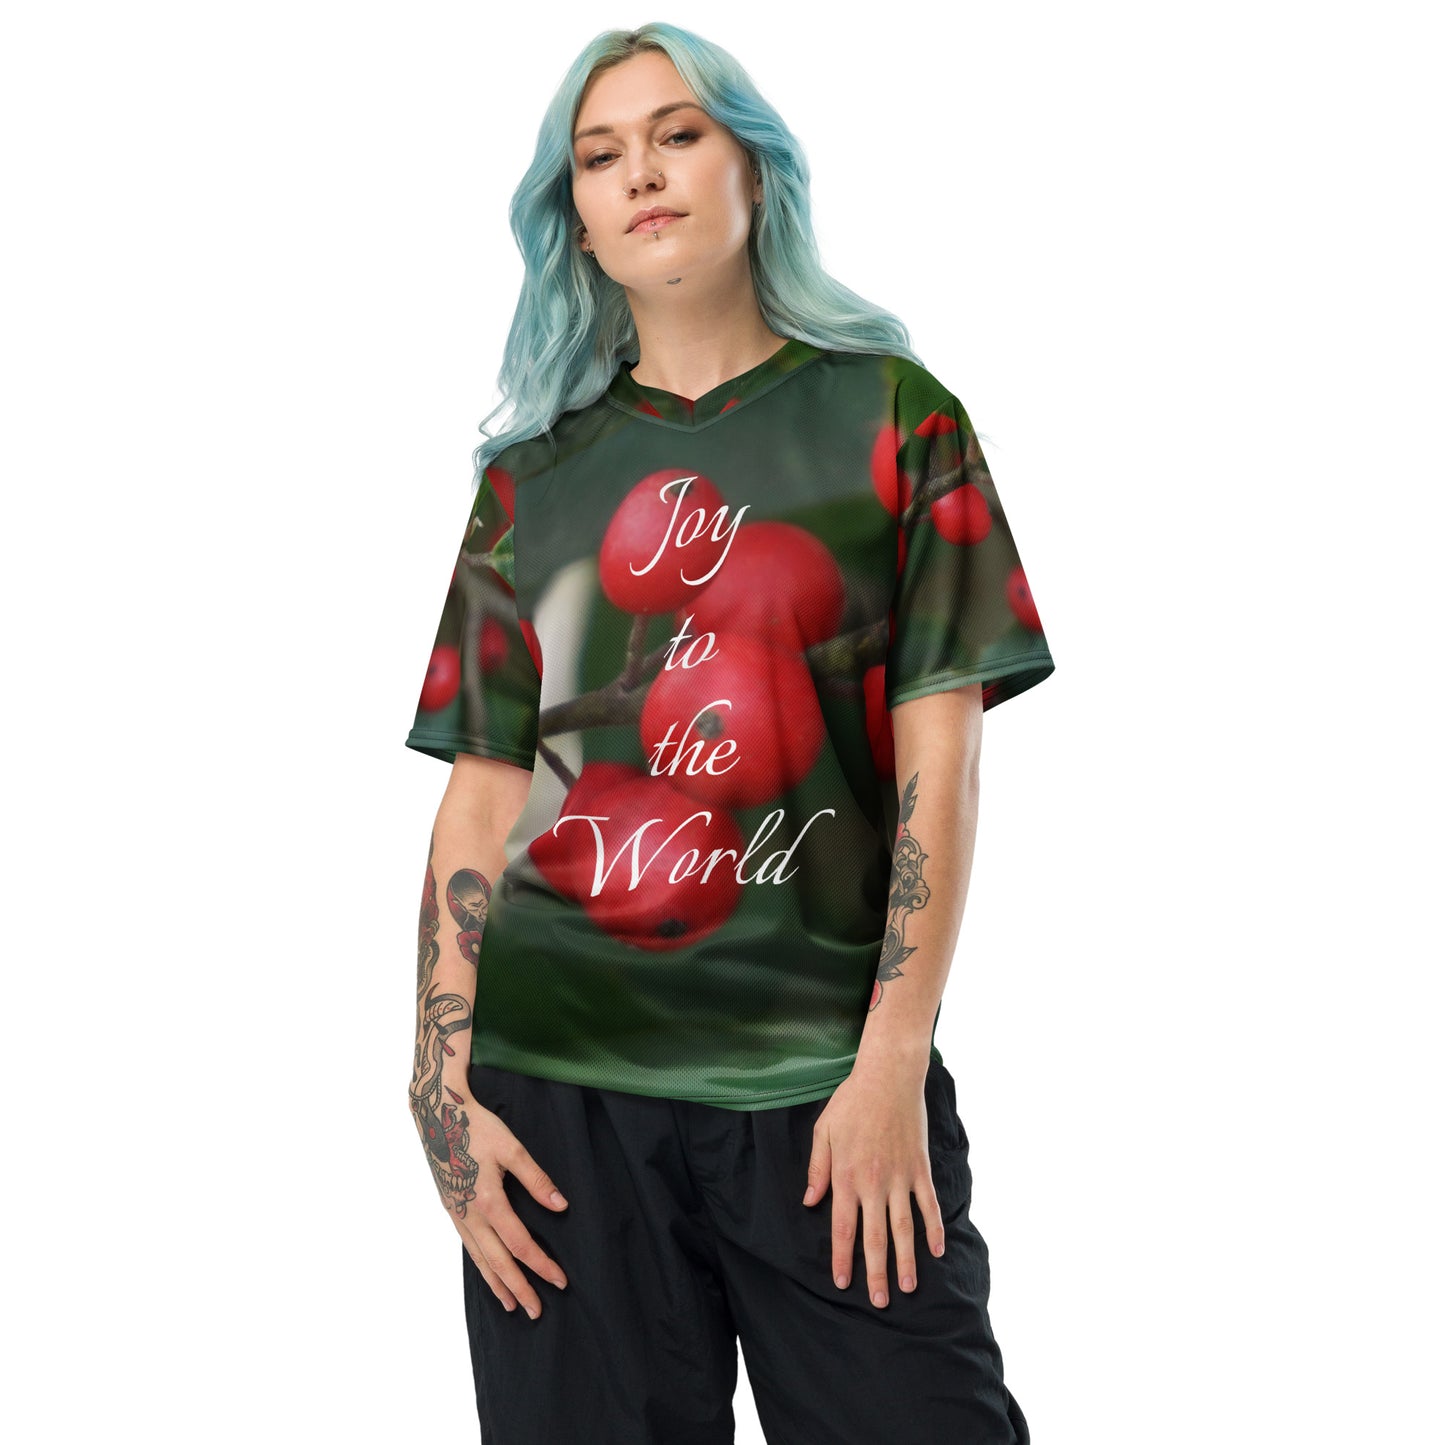 Joy to the World_Holly Berries_Recycled unisex sports jersey